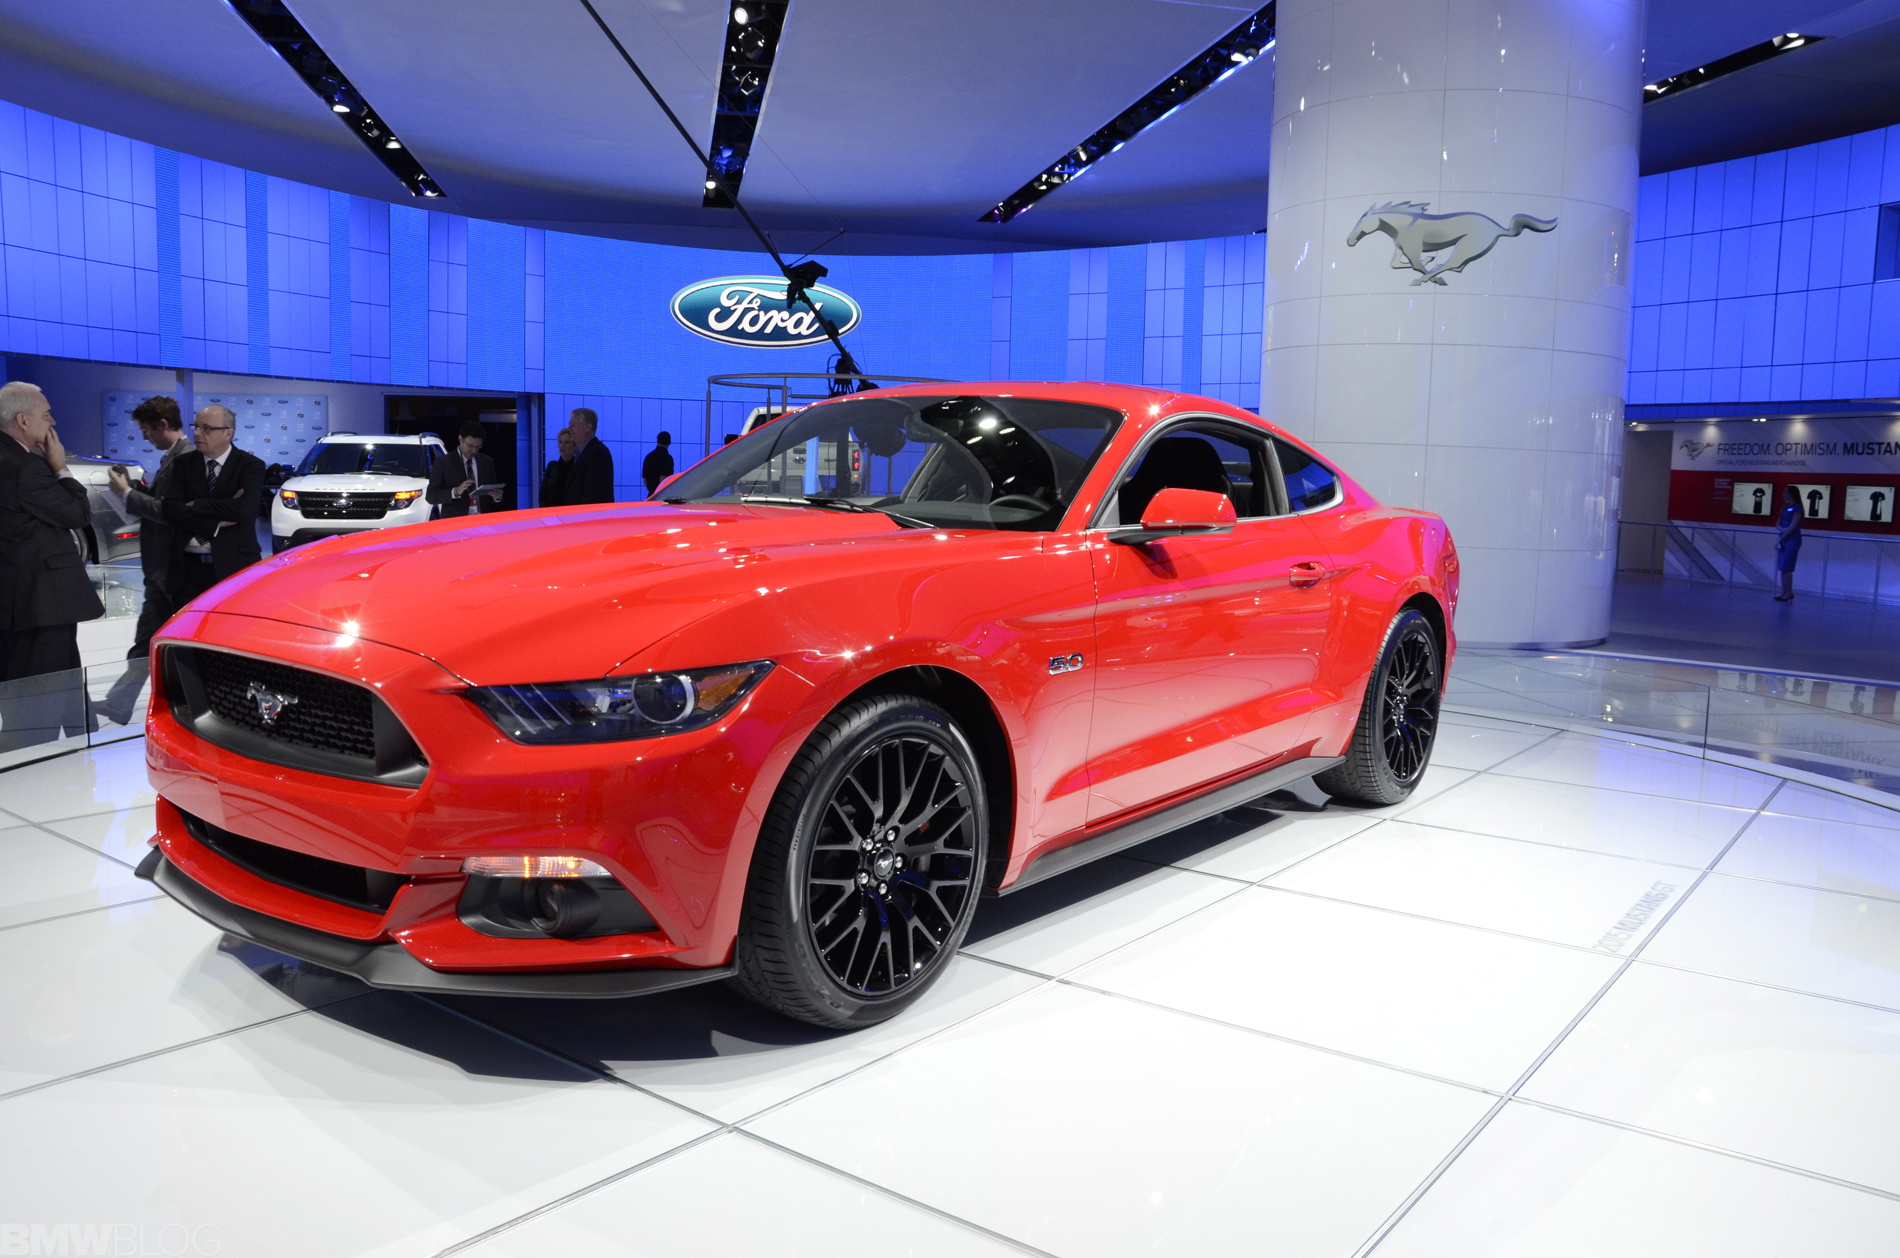 2015 Ford mustang detroit auto show #5